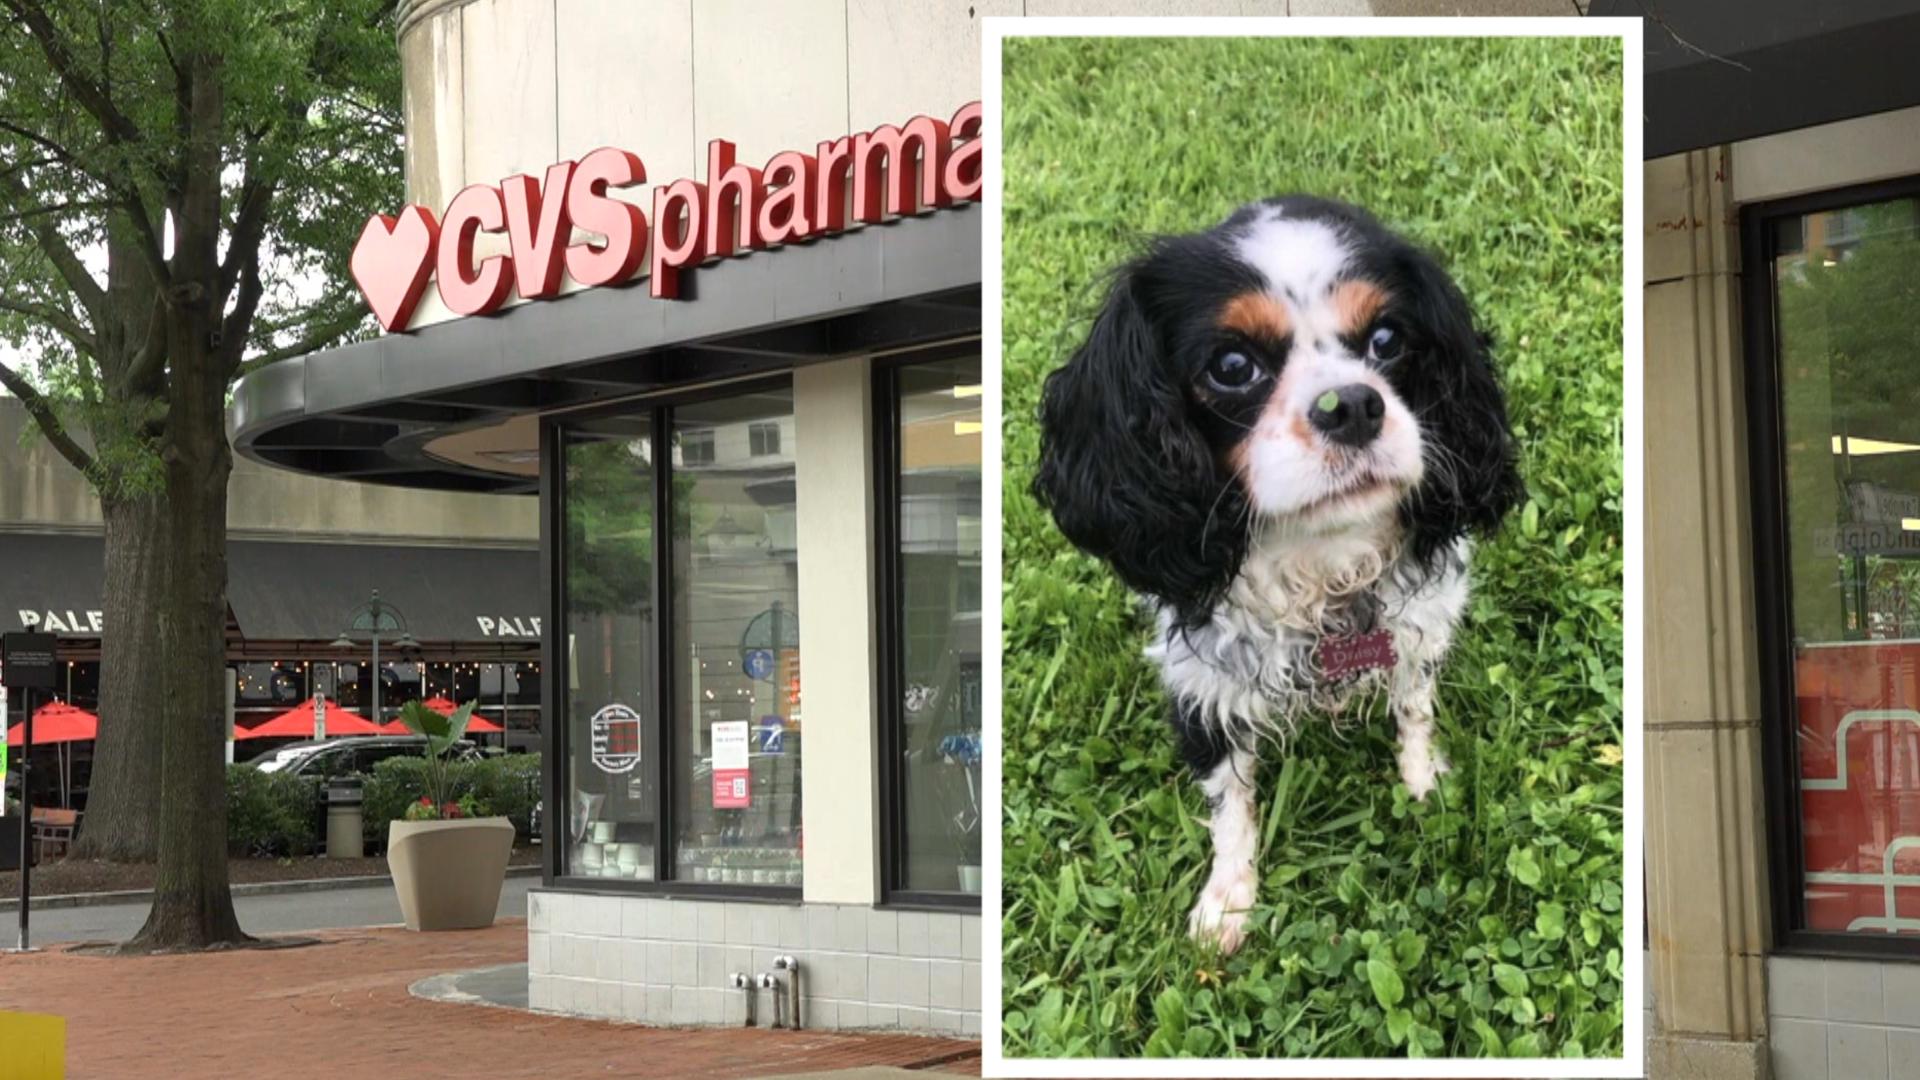 More than a month after a woman claimed her dog died because of a prescription error, she has retained a lawyer with plans to file a lawsuit against CVS Pharmacy.